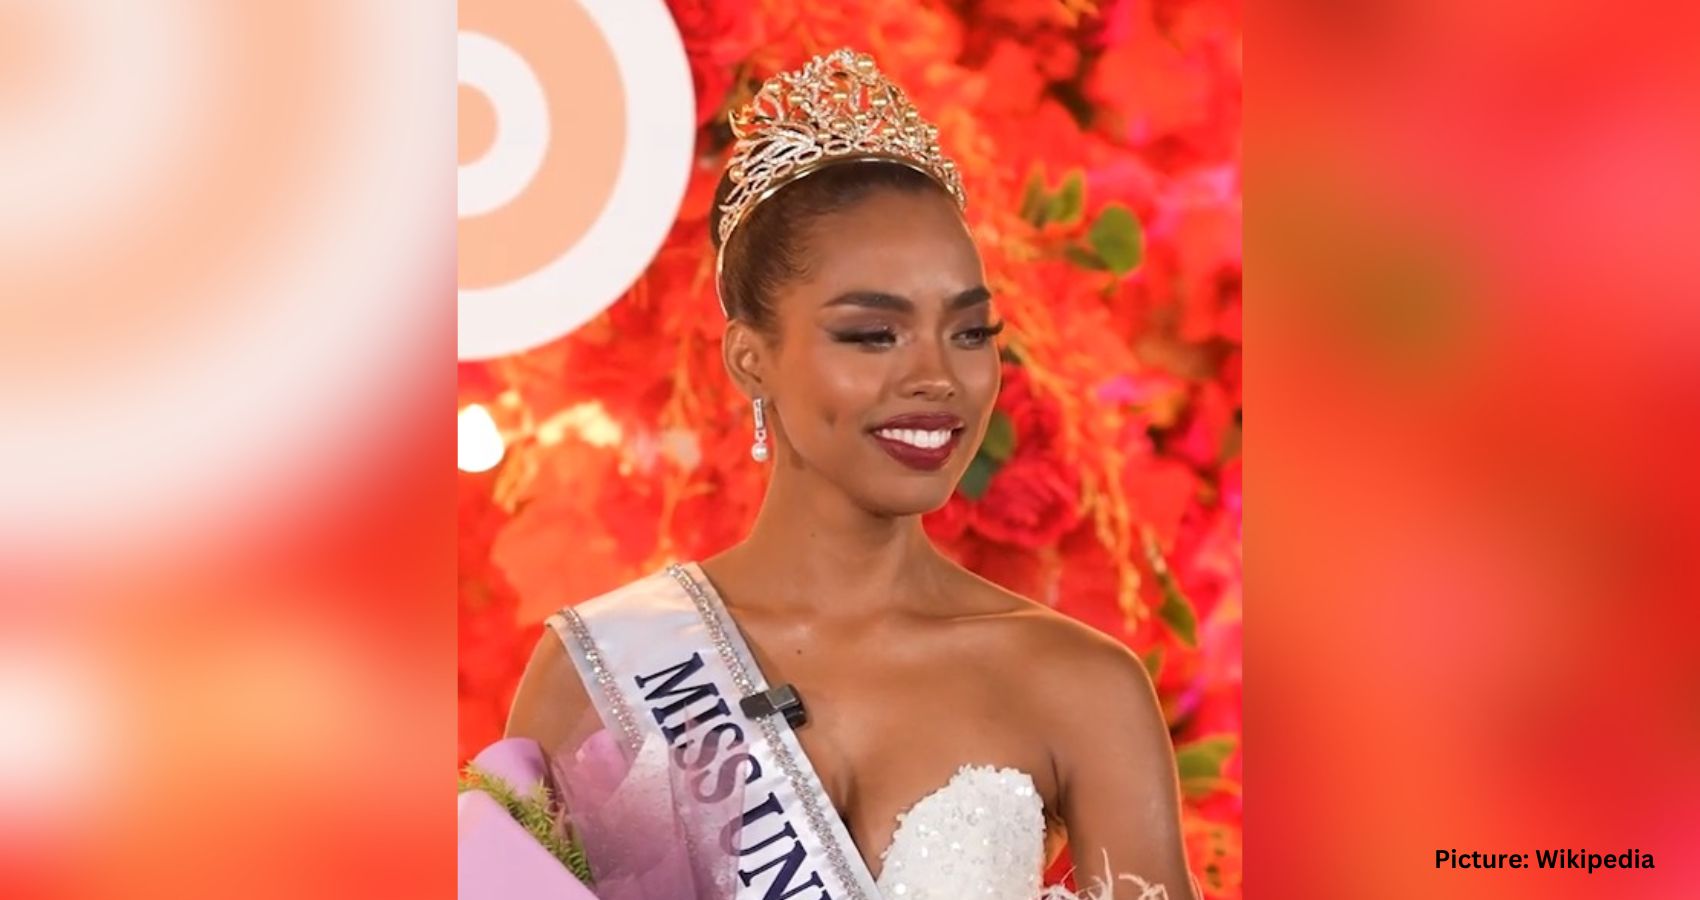 Chelsea Manalo Becomes First Black Woman Crowned Miss Universe Philippines, Breaking Traditional Beauty Standards